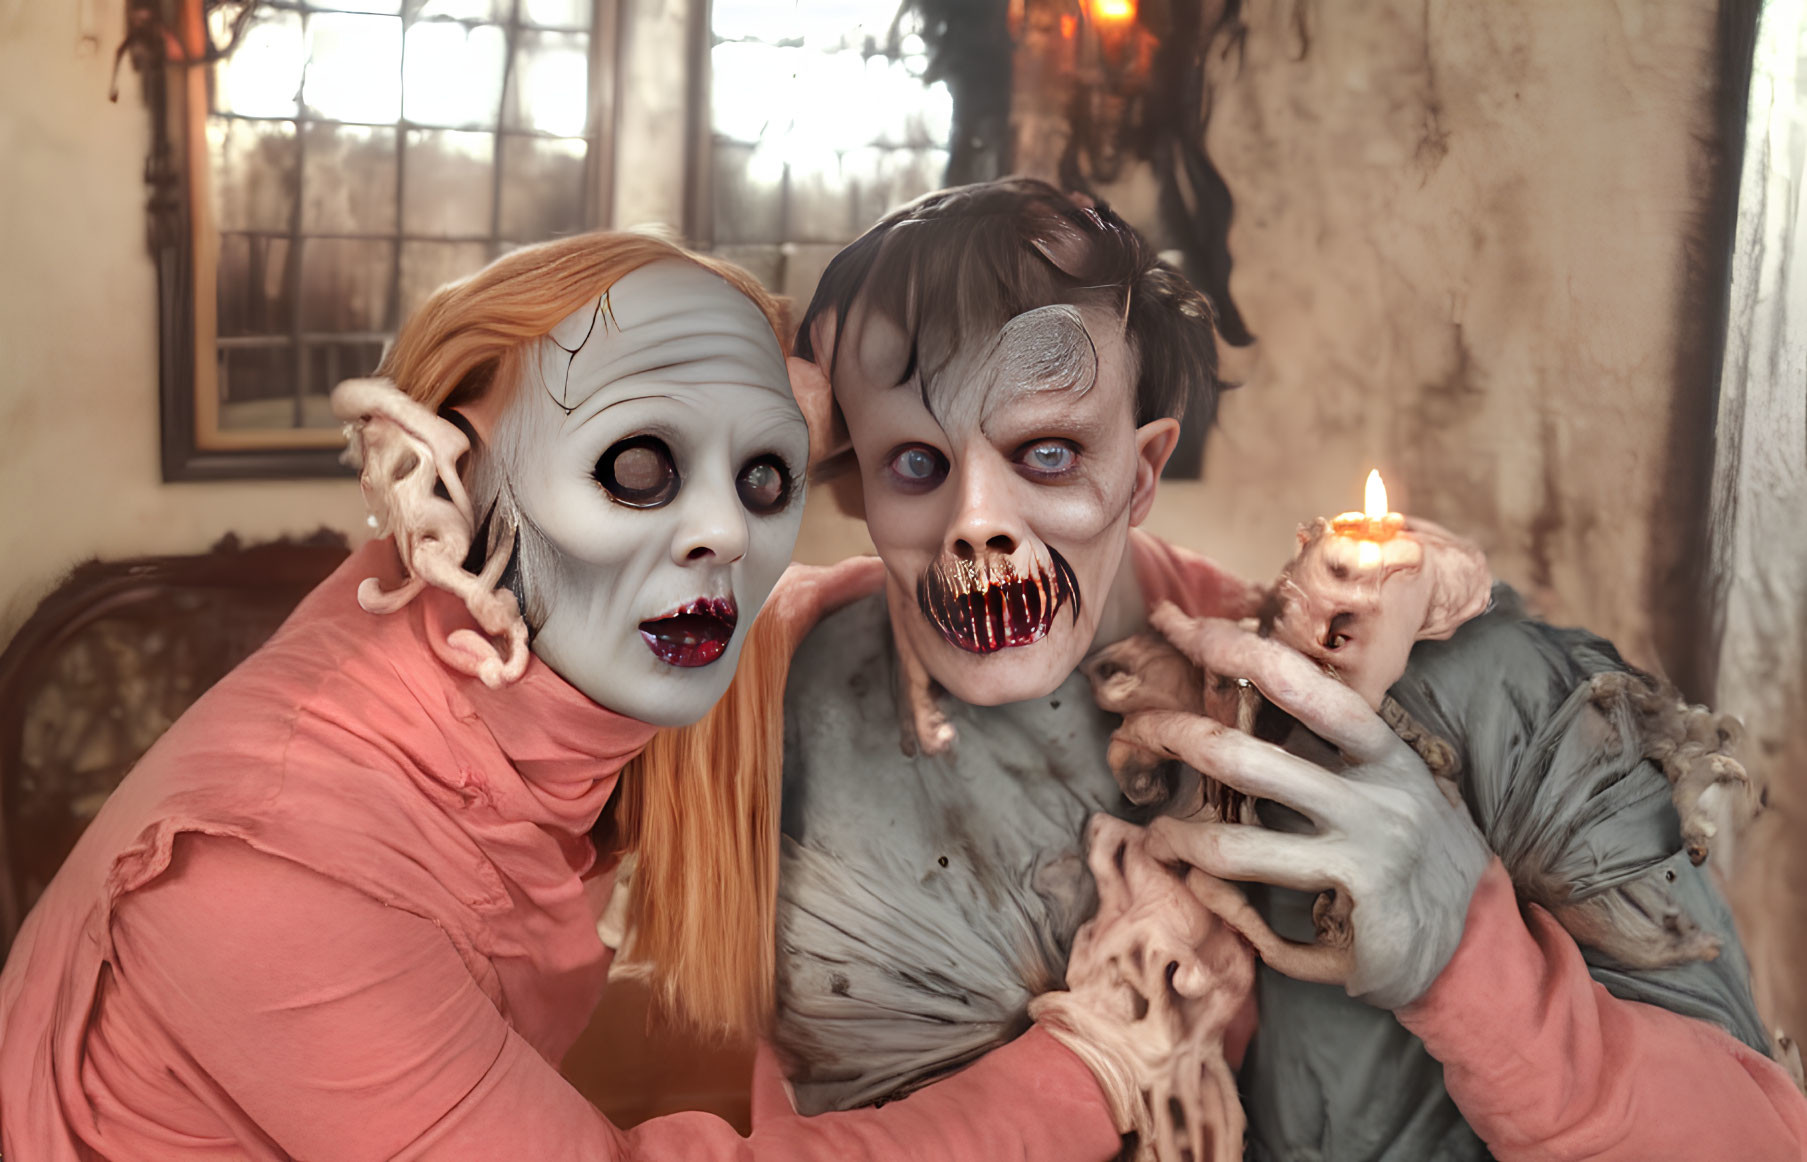 Two people with horror makeup holding a candle in dim, eerie scene